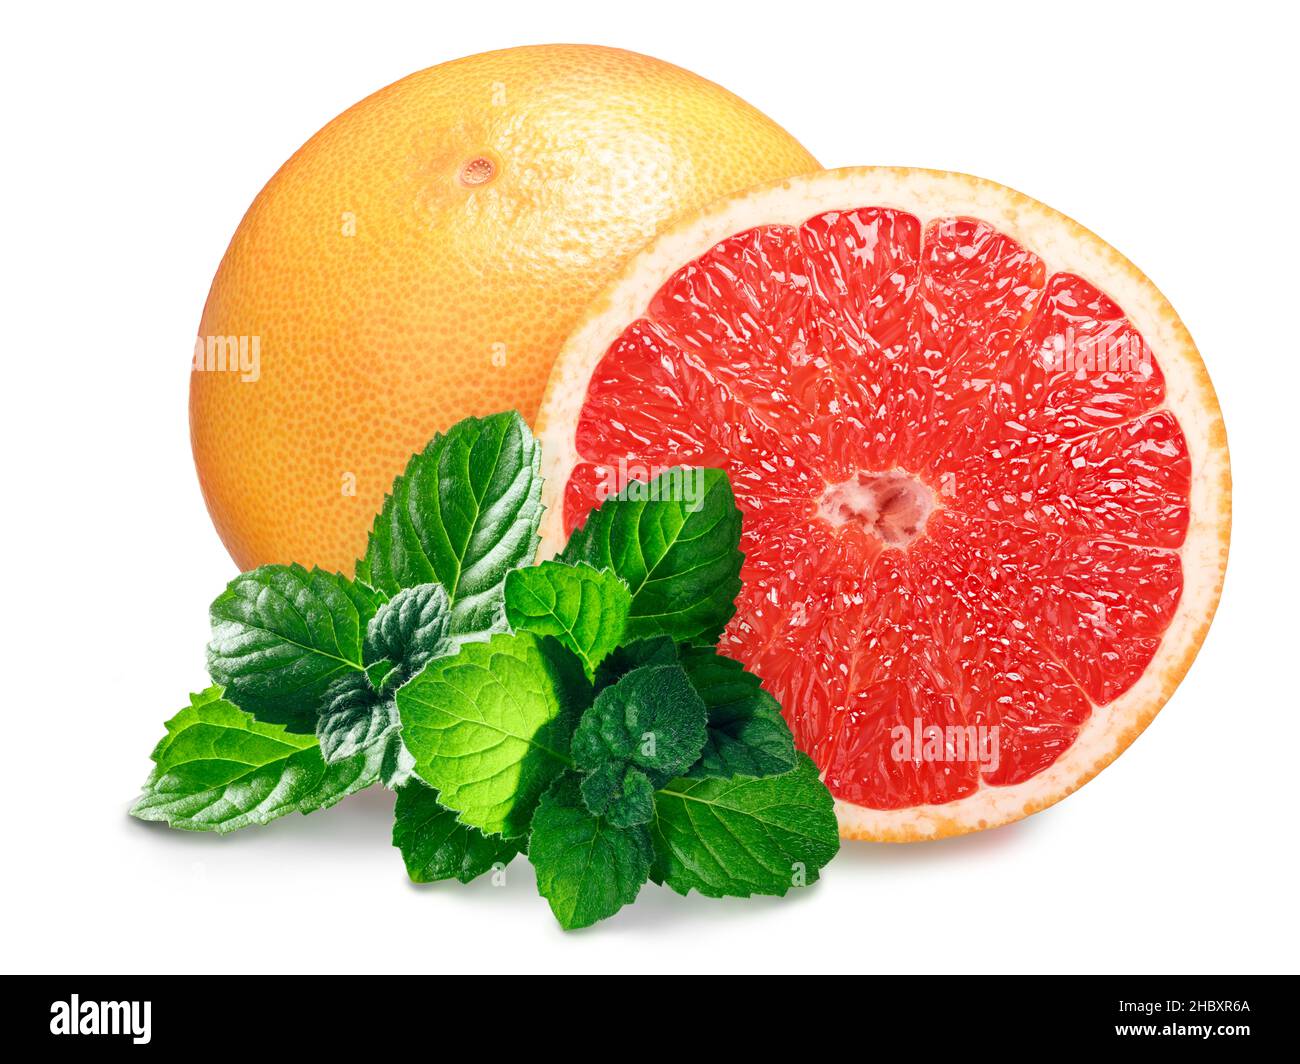 Grapefruit with mint leaves isolated Stock Photo